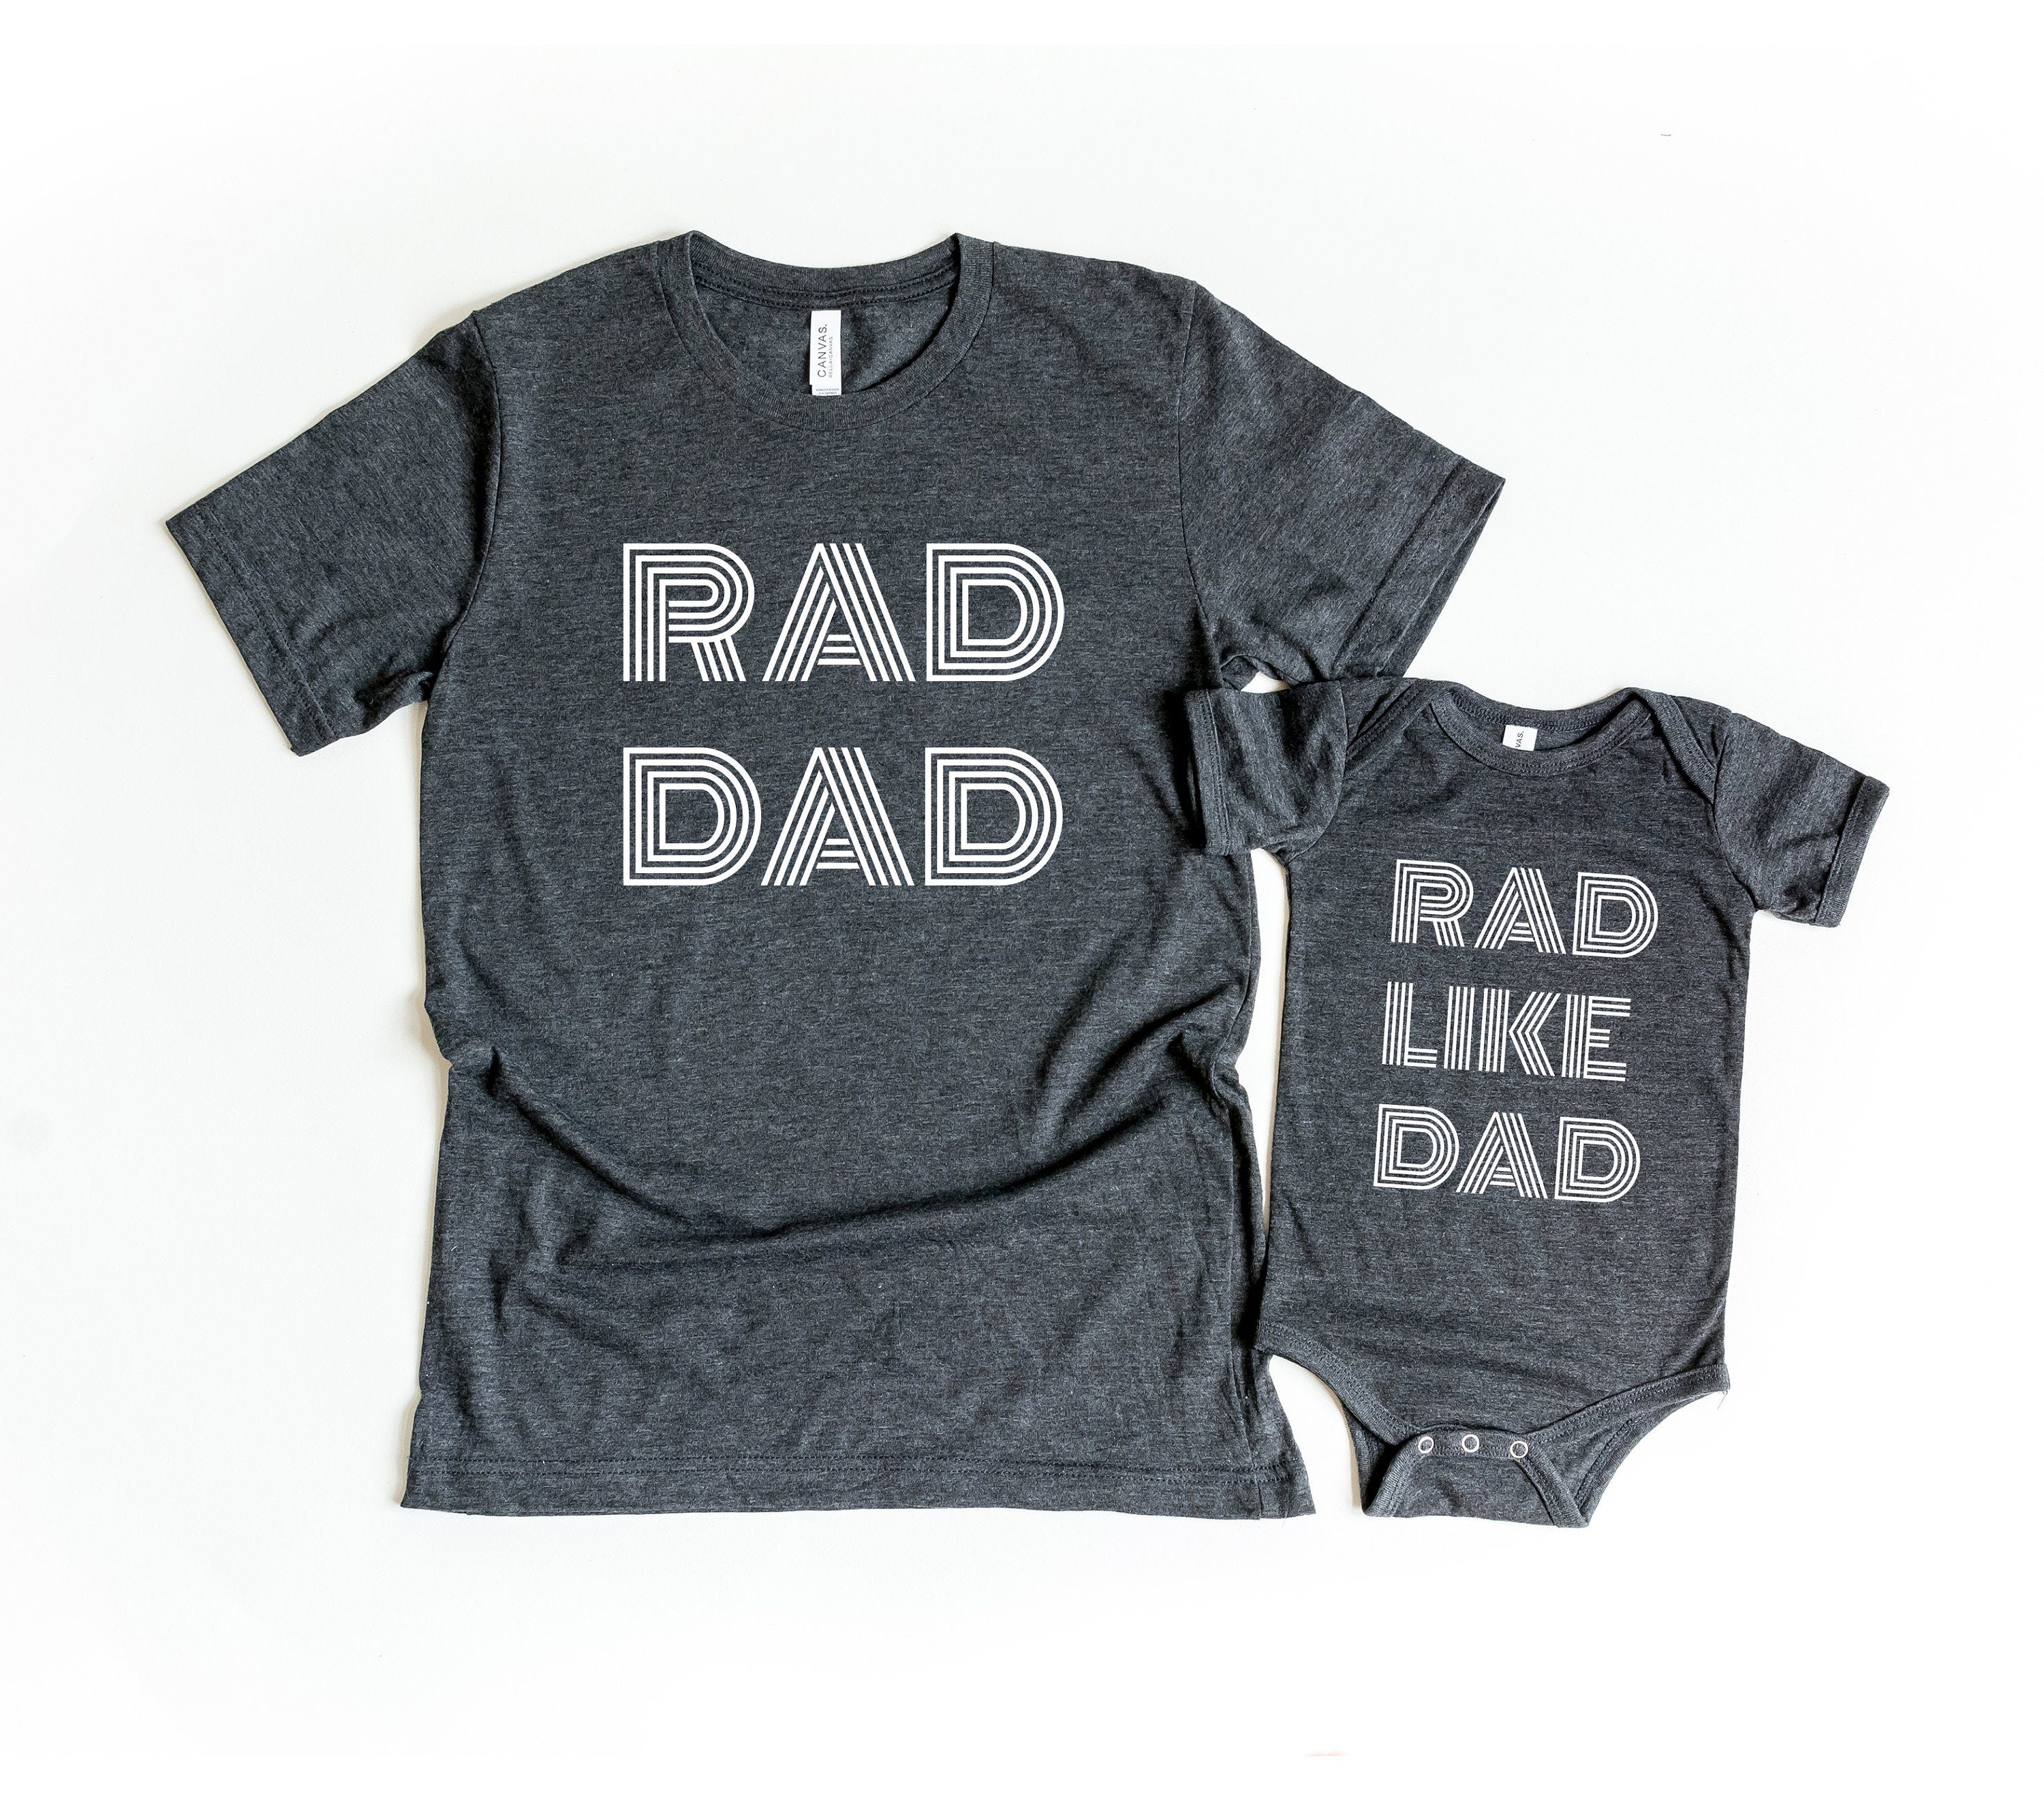 Retro Rad Dad Rad Like Dad Shirts, Fathers Day Shirts, Matching Dad And Mini Shirts, Gift For Fathers Day, New Dad Shirts, Cool Dad, AKR82